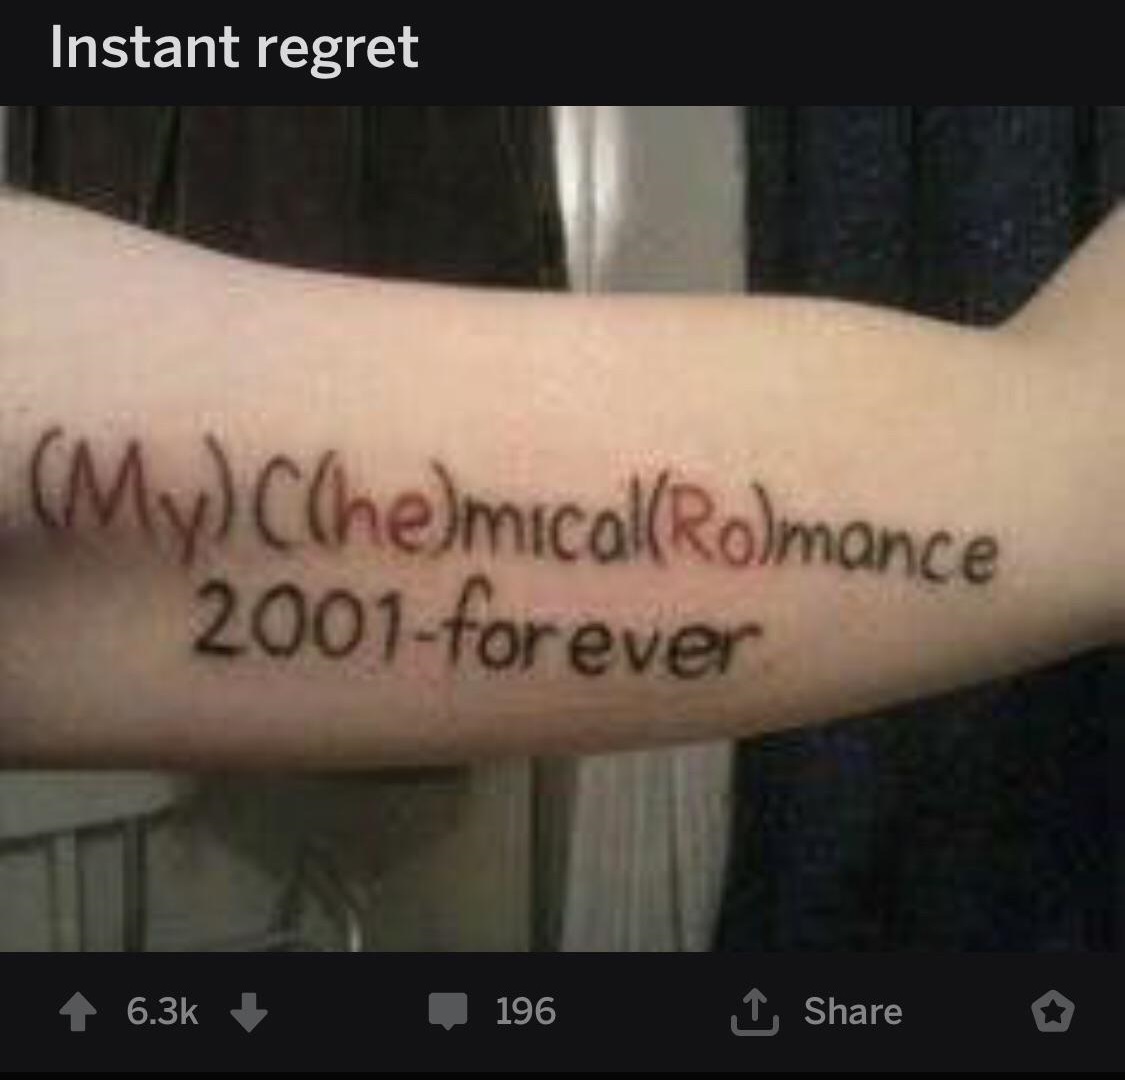 arm - Instant regret My Clhelmical Romance 2001forever 196 o